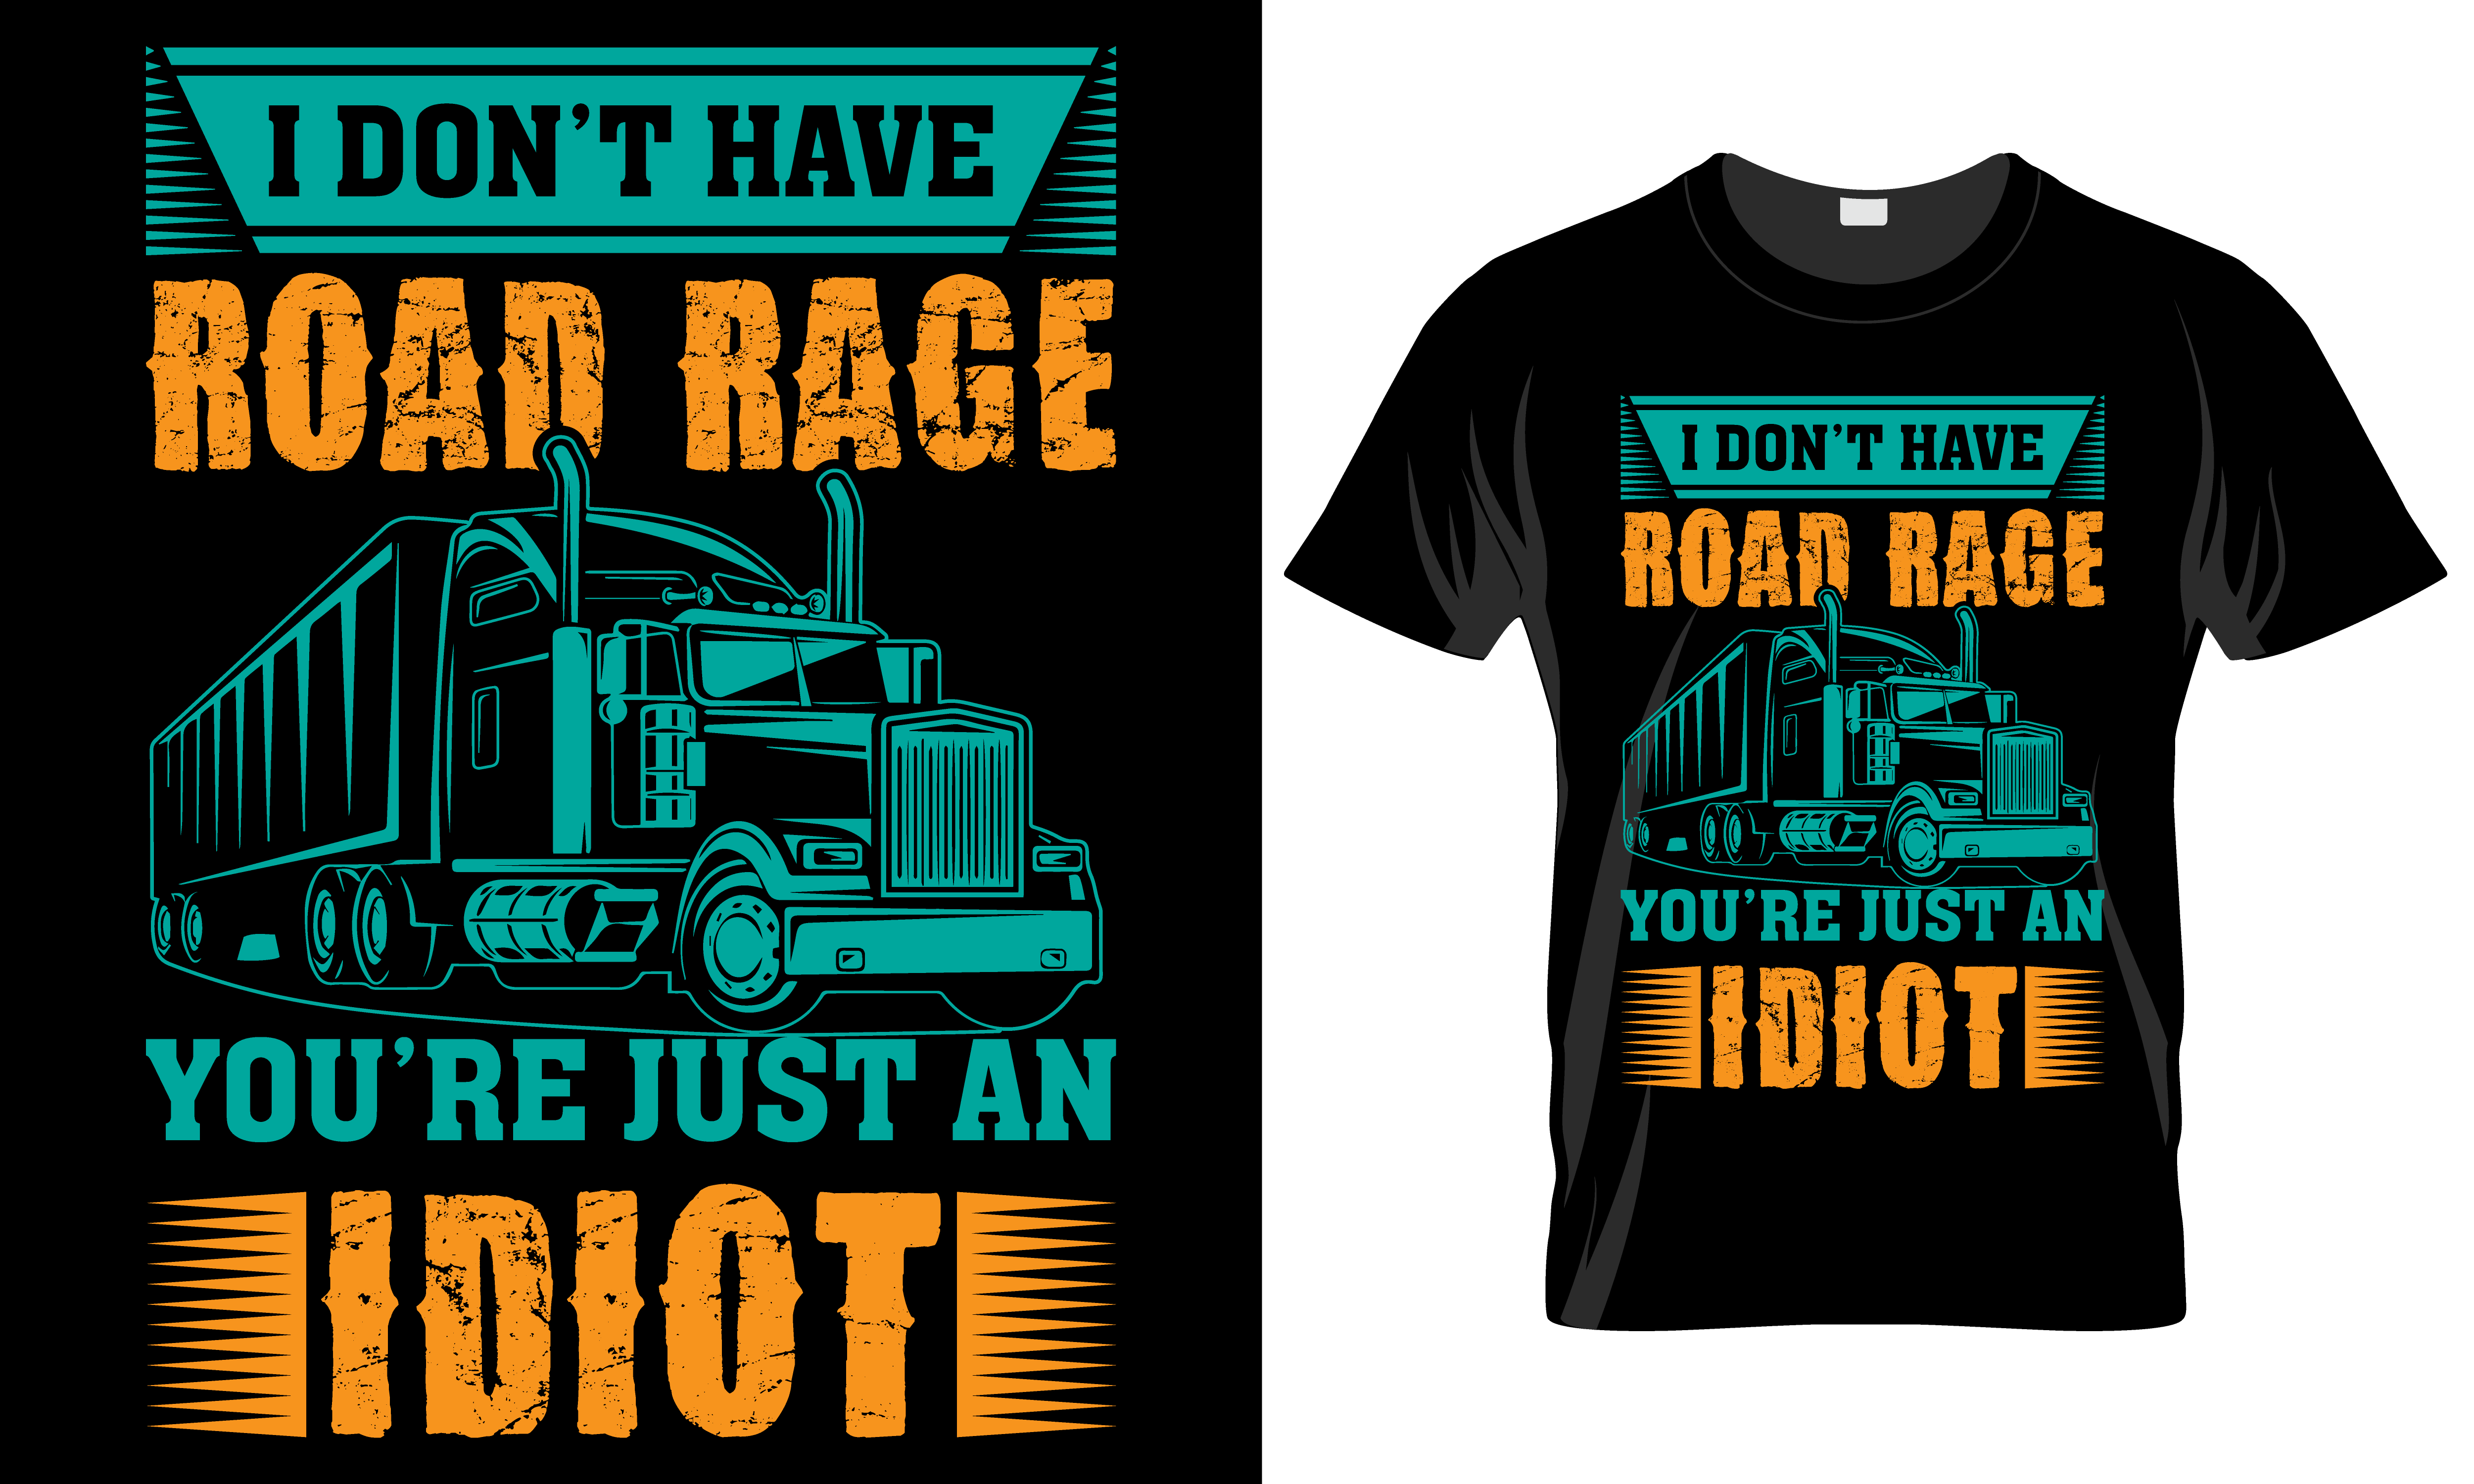 Image of a T-shirt with a great truck print